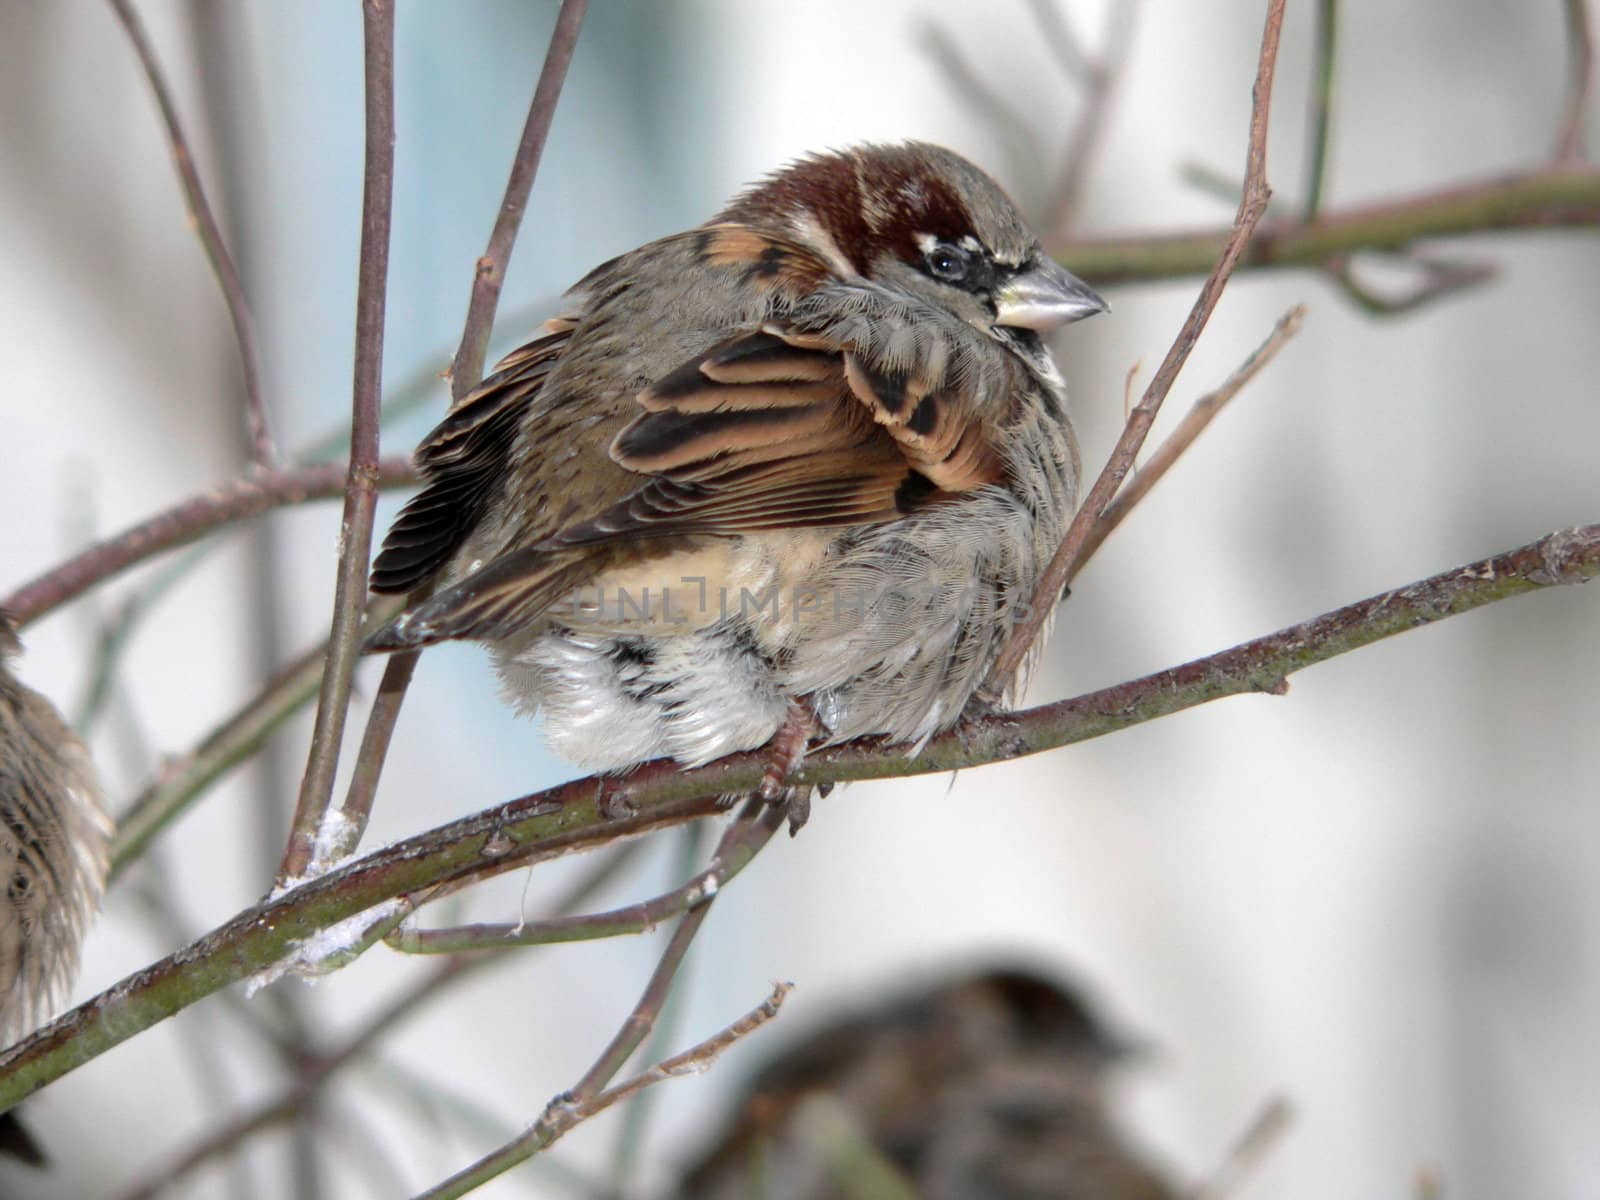 Sparrow sits on branch in winter Sparrow sits on branch in winter